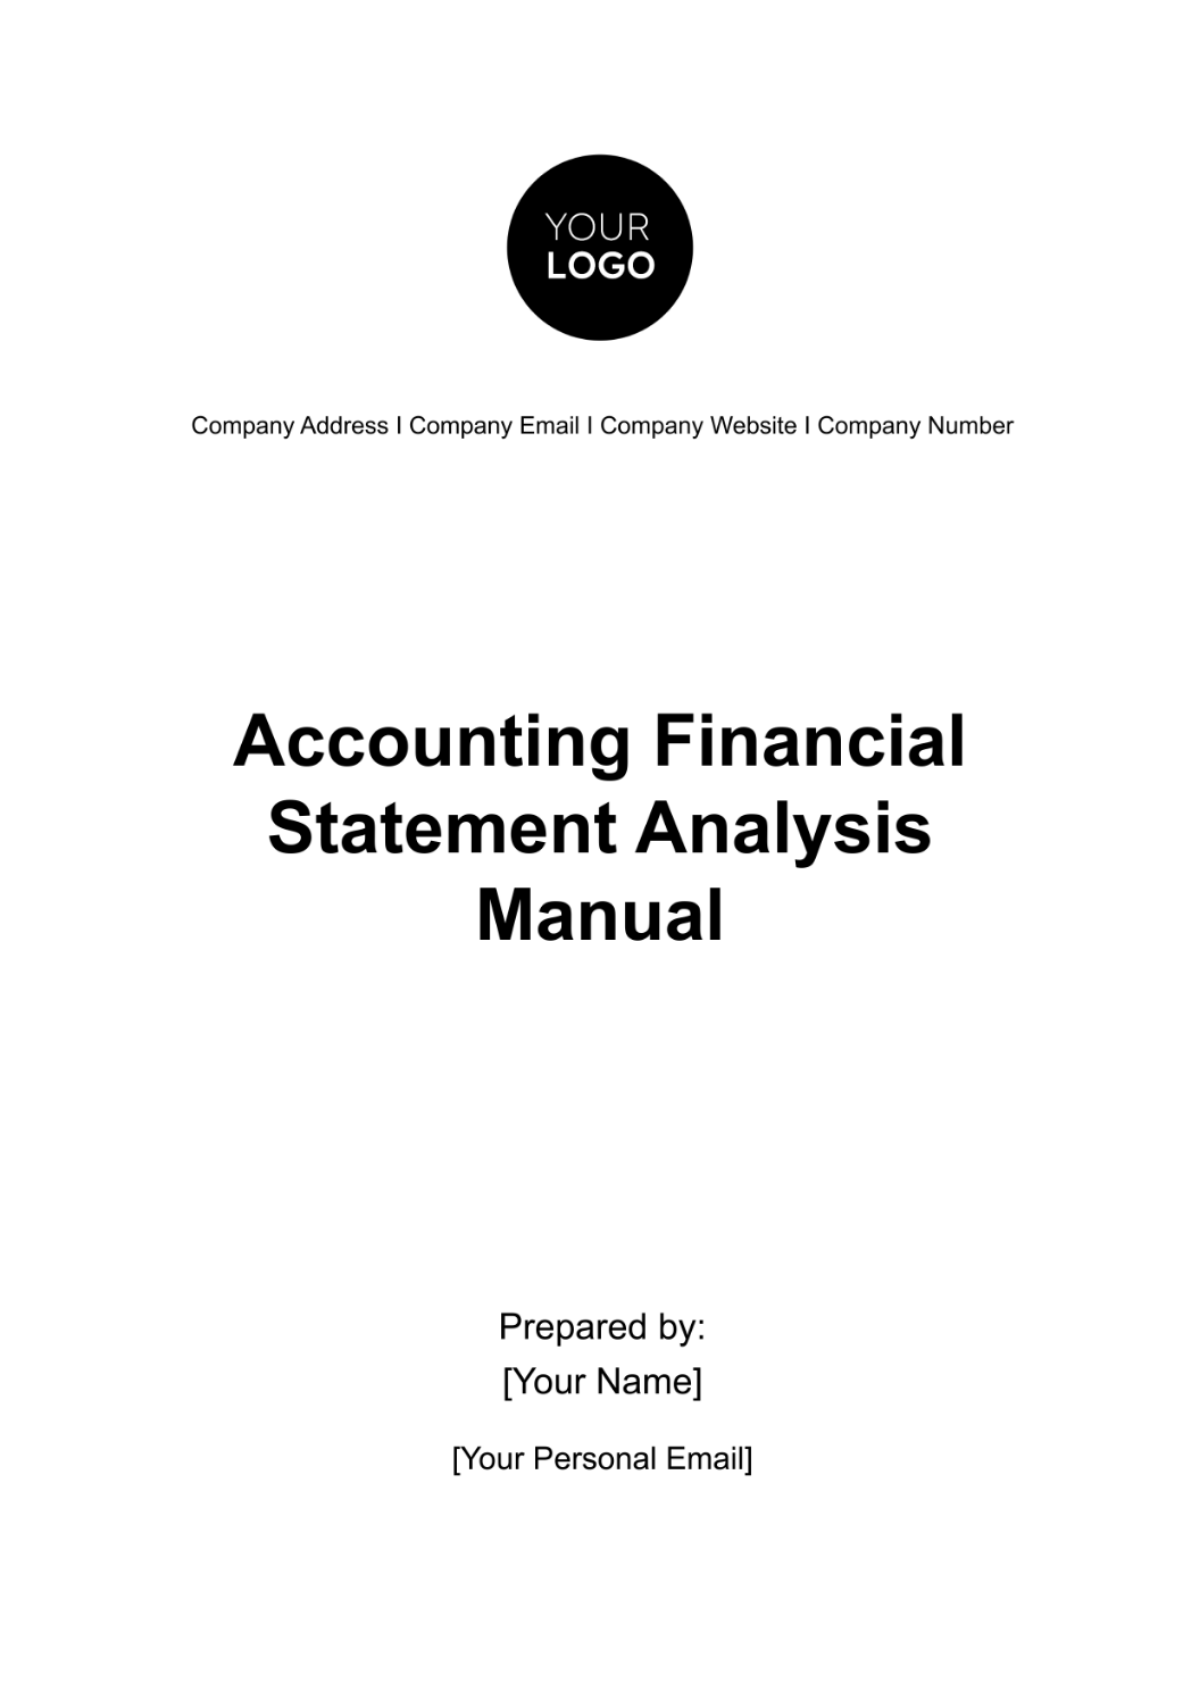 Accounting Financial Statement Analysis Manual Template